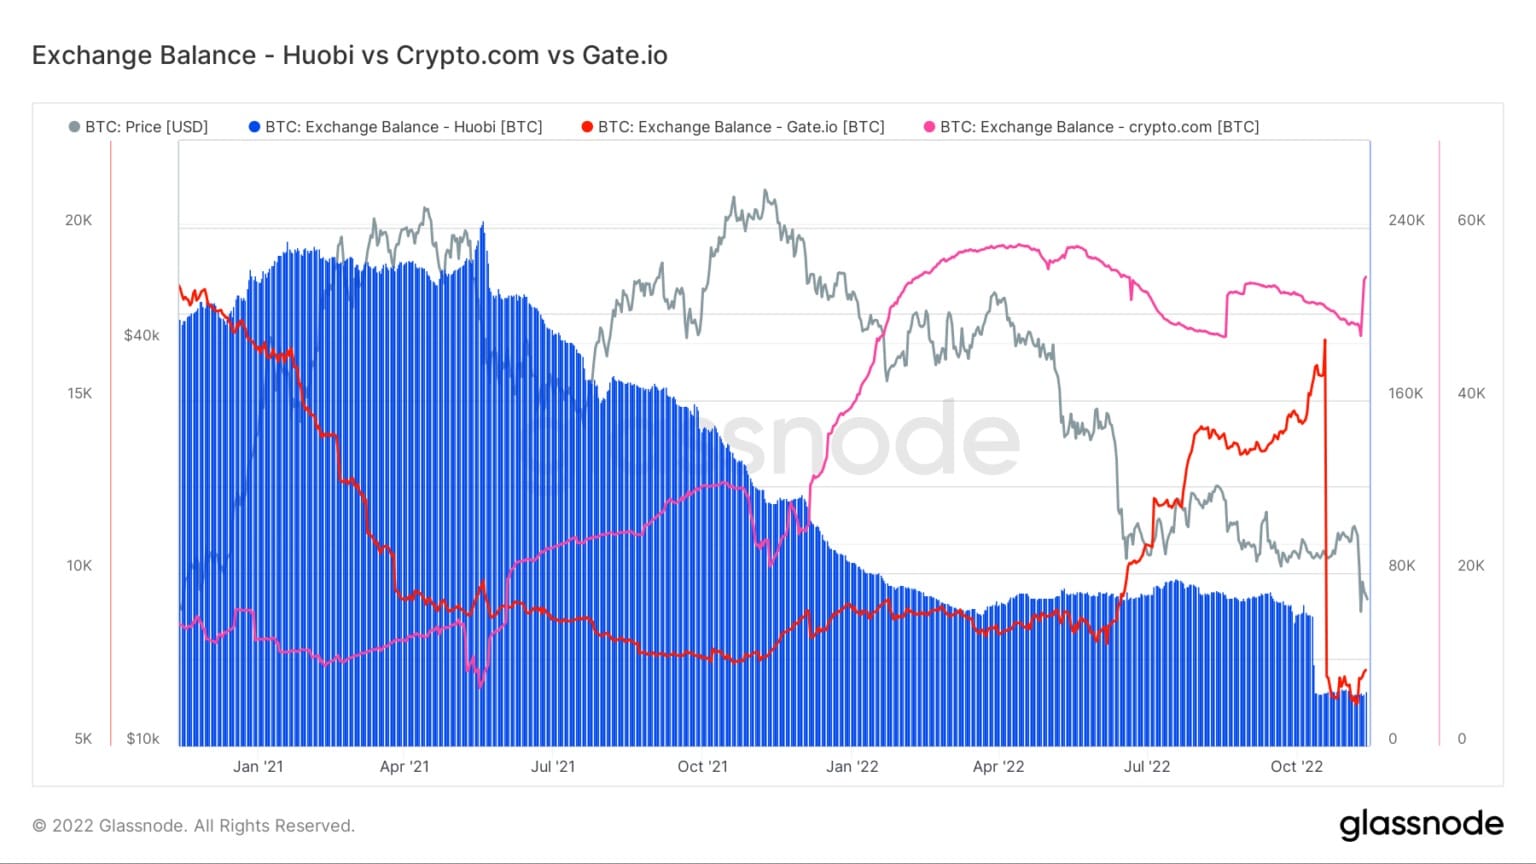 Graph showing Bitcoin balances on Huobi, Crypto.com, and Gate.io from January 2021 to November 2022 (Source: Glassnode)